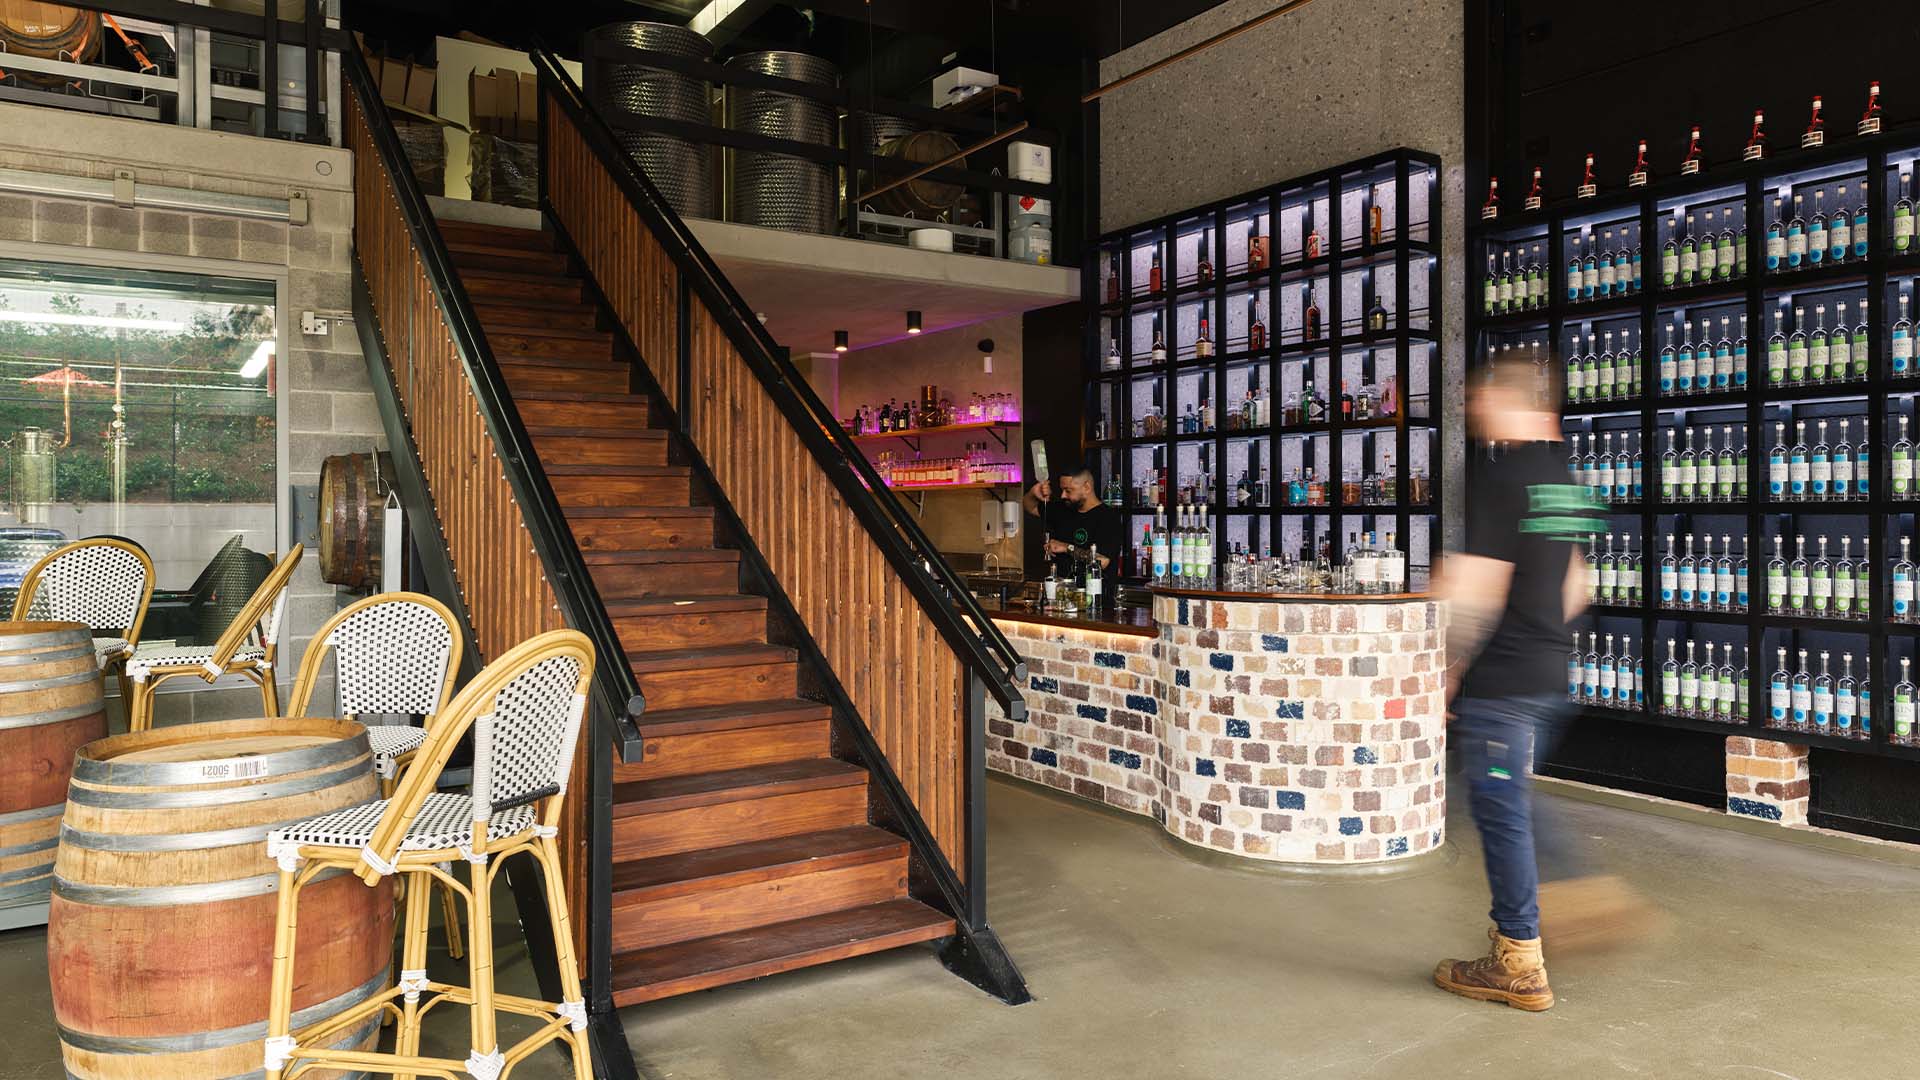 The Hills Has Welcomed Its First Locally Owned Distillery — with Guided Tours and Friday Dumplings